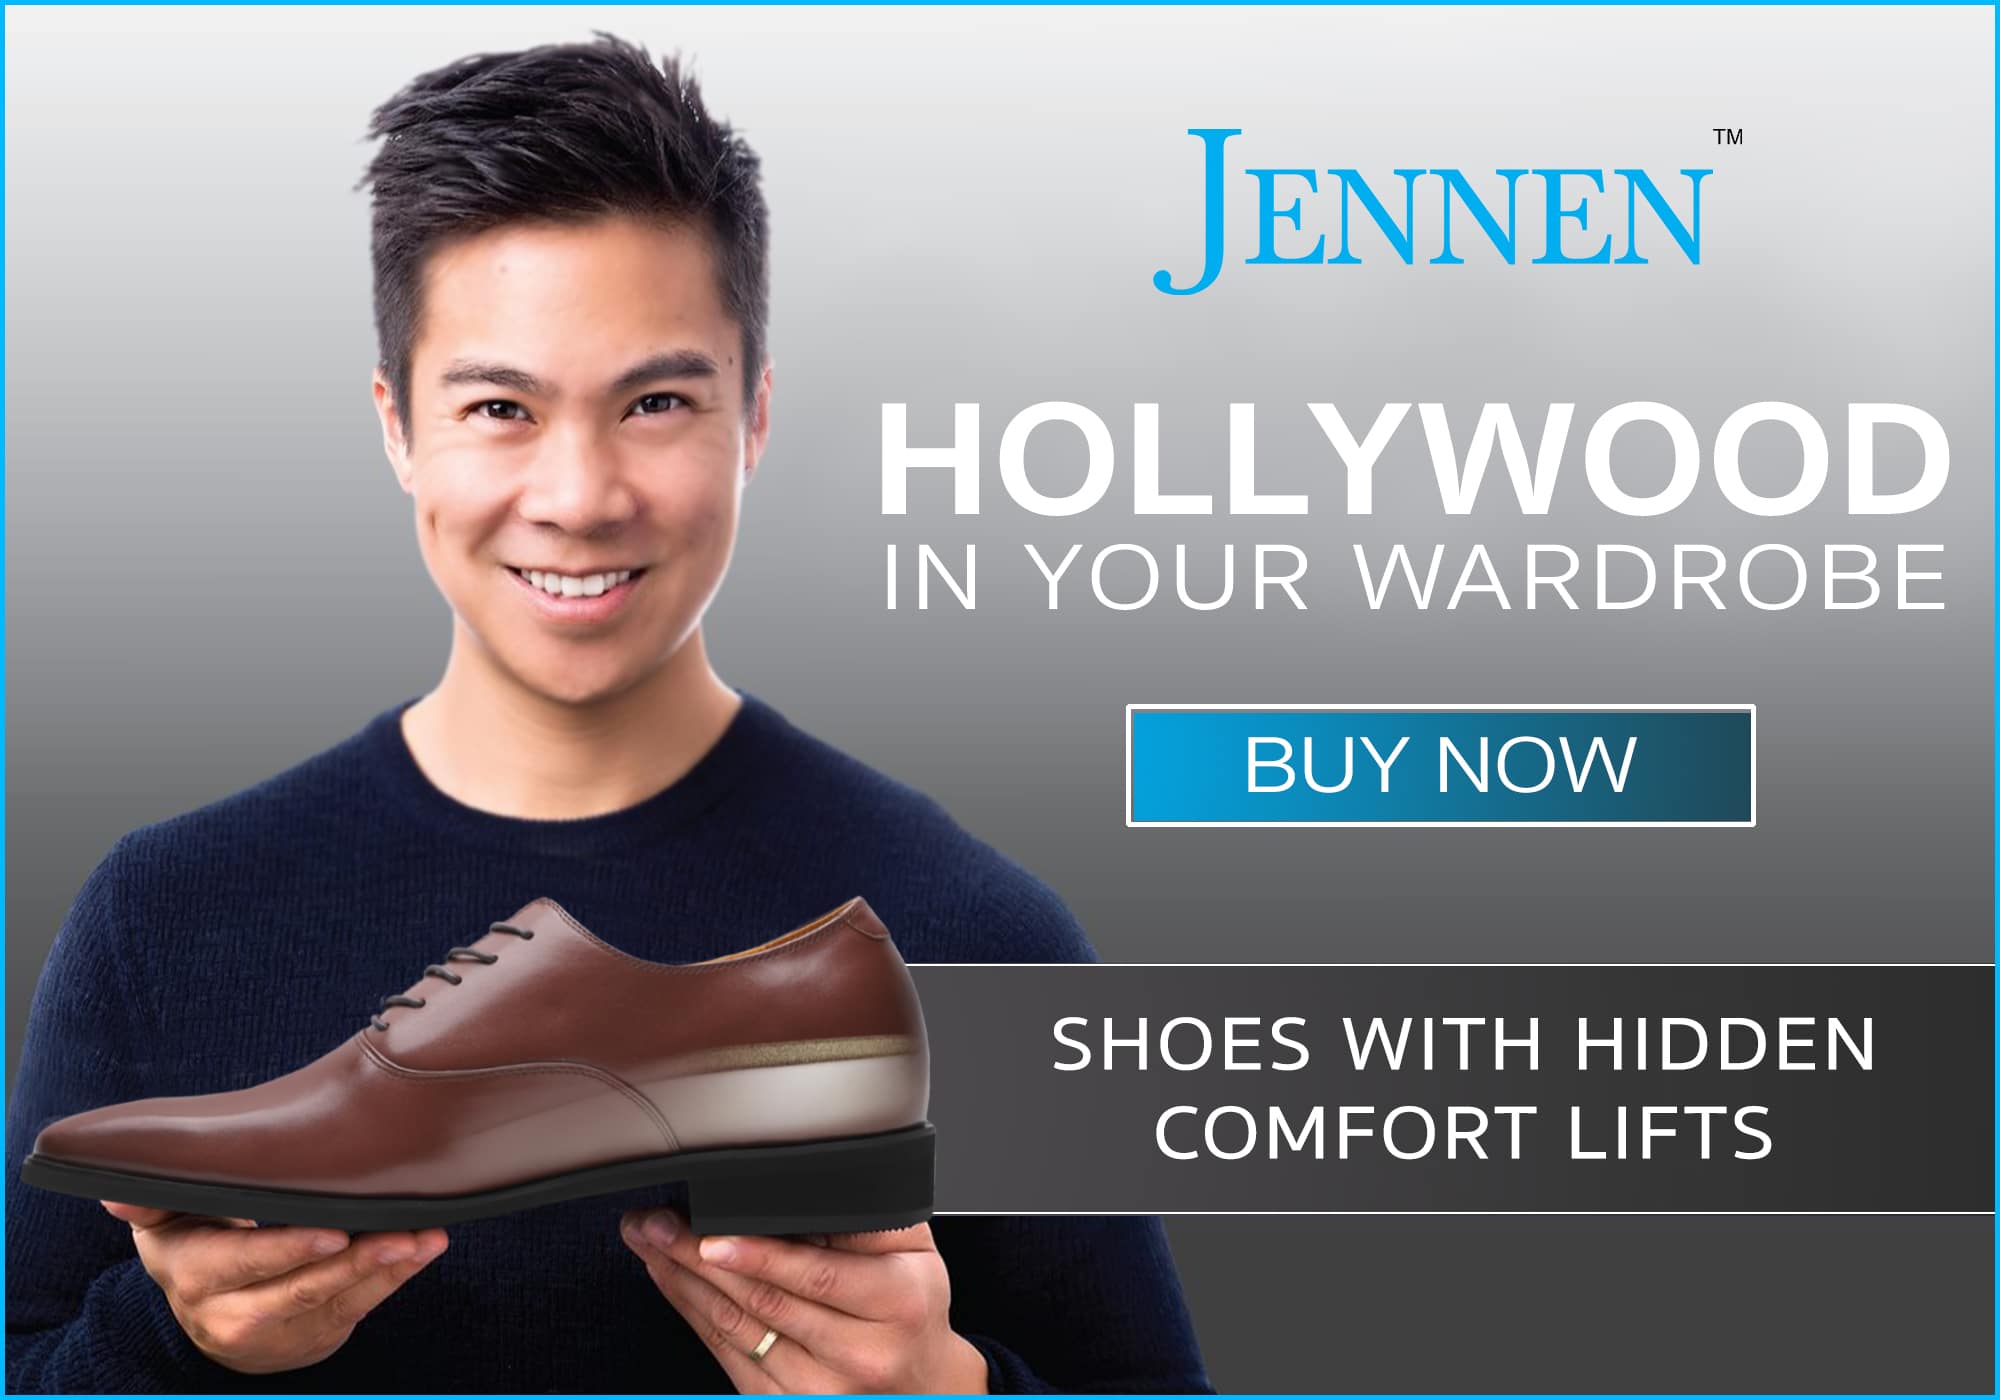 JENNEN shoes | Worn by Hollywood Celebrities